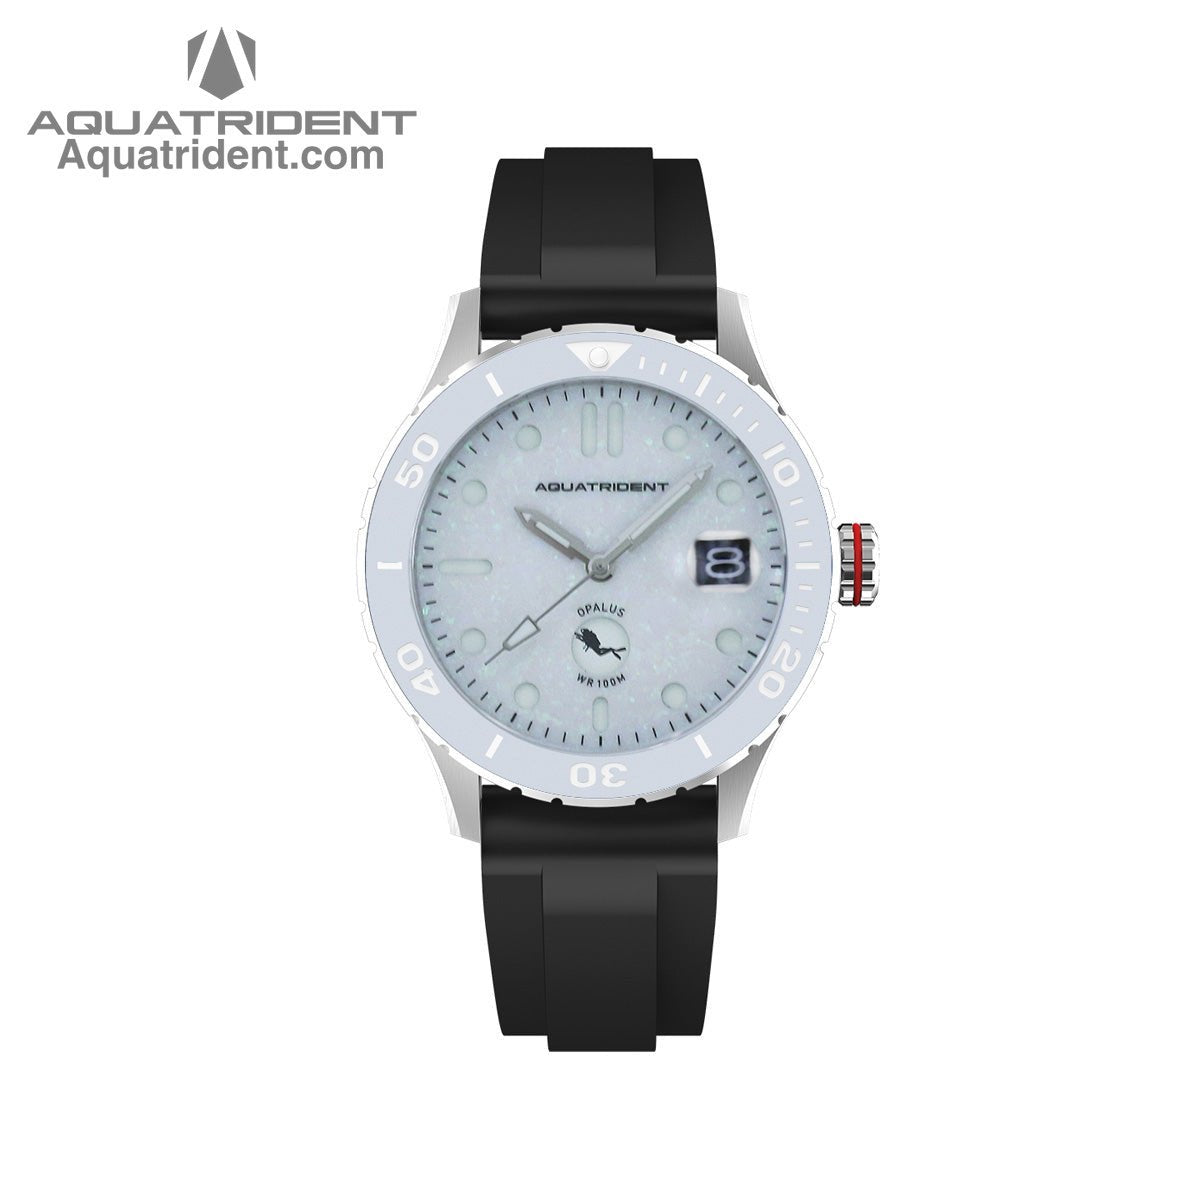 Aquatrident's Ocean Automatic Watch with Ceramic，Rotating, 120 clicks Bezel and pearl blue opal Dial front view